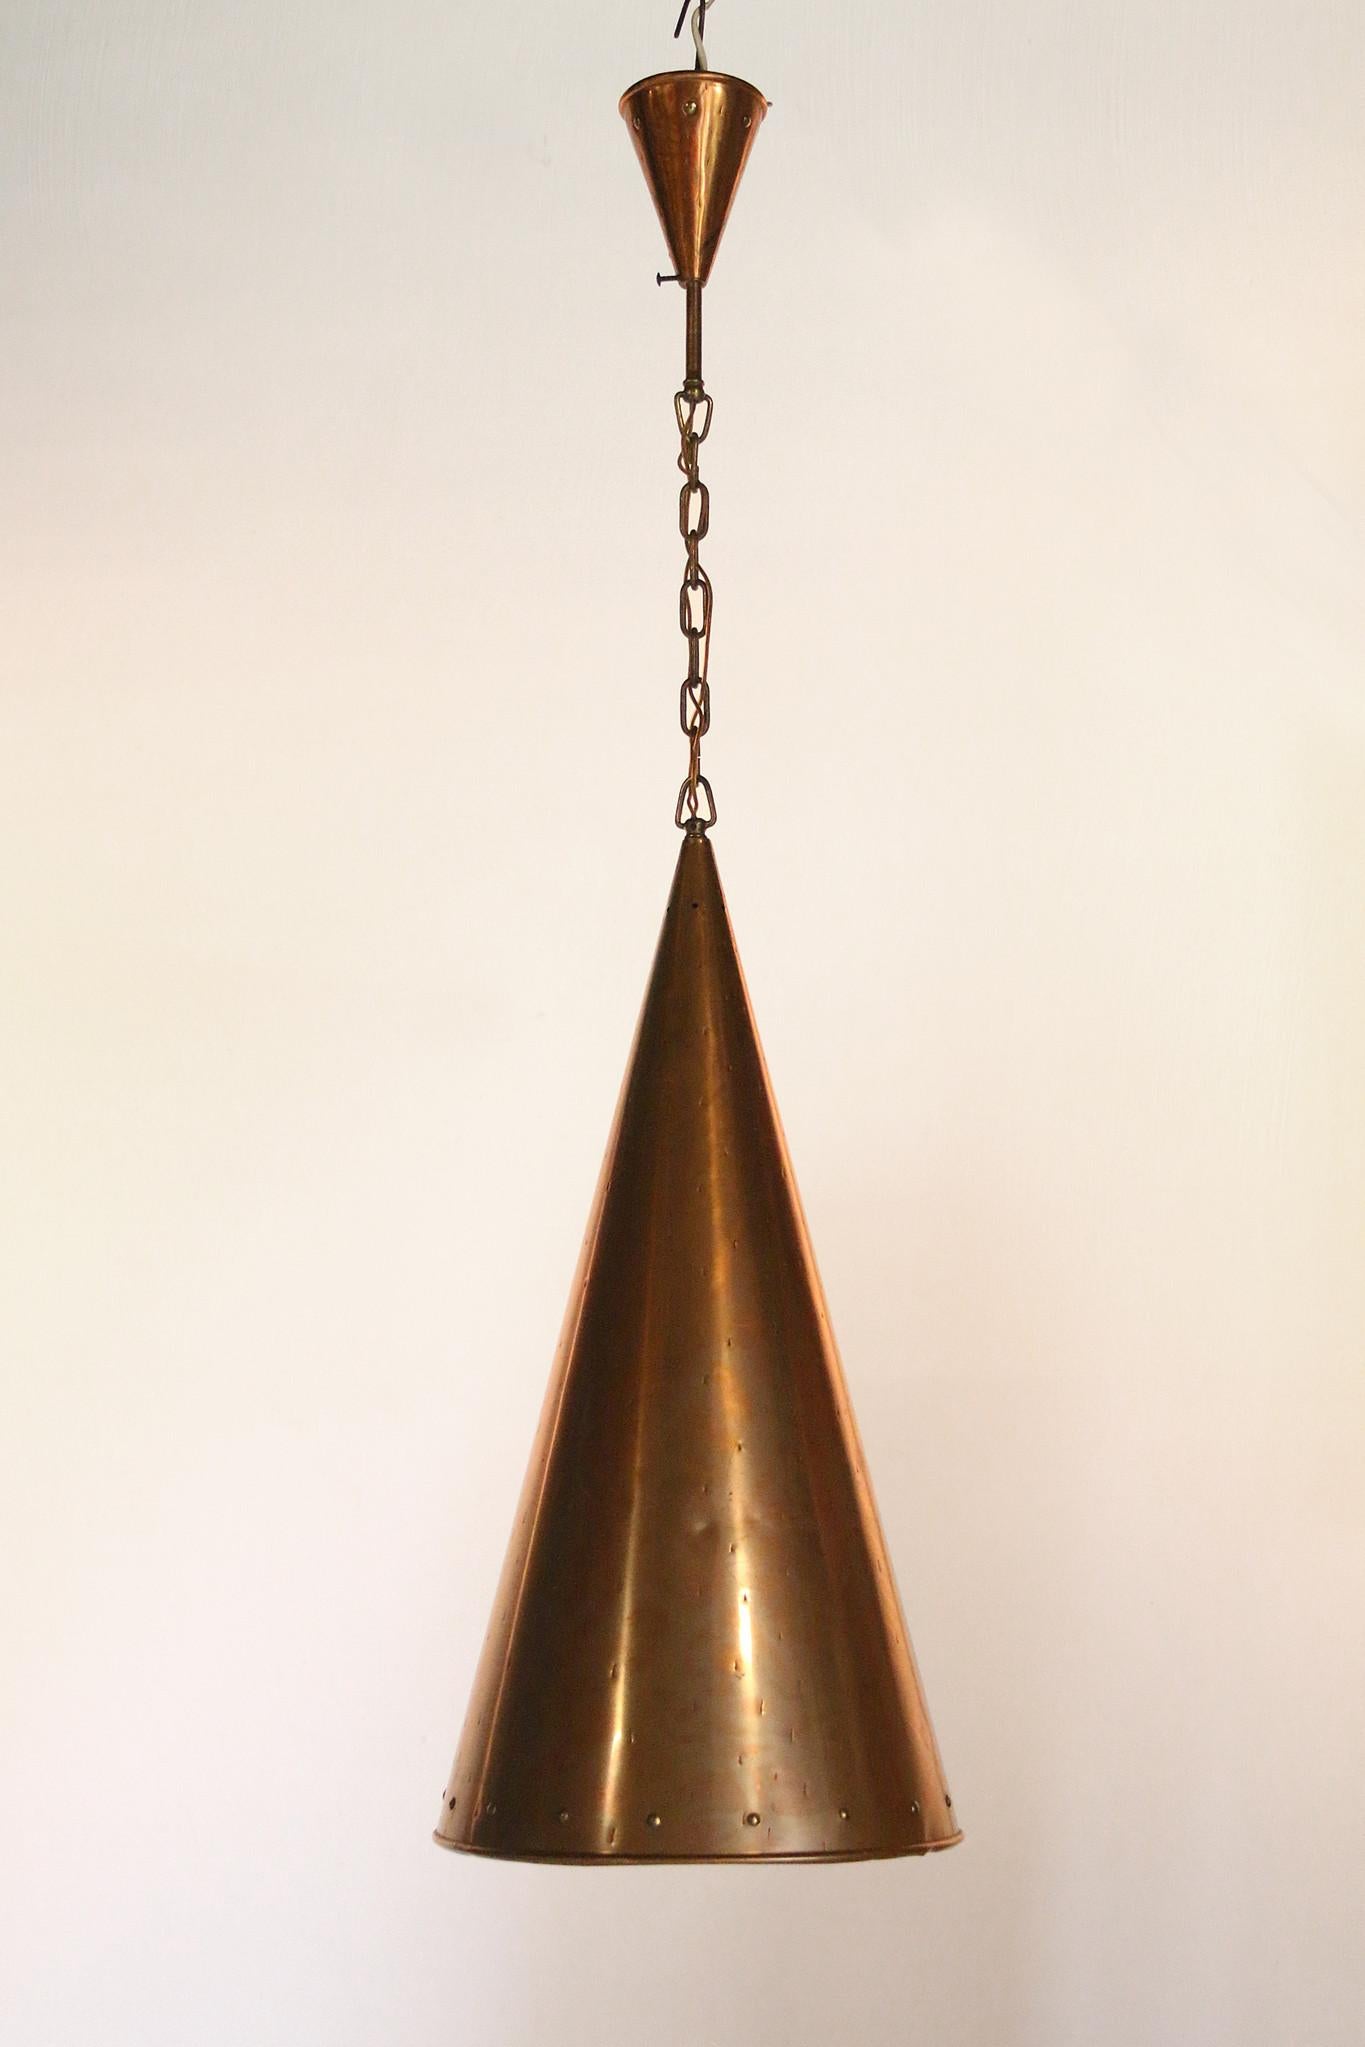 Danish Hand Hammered Copper Pendant Lamp from E.S Horn Aalestrup, 50s For Sale 2